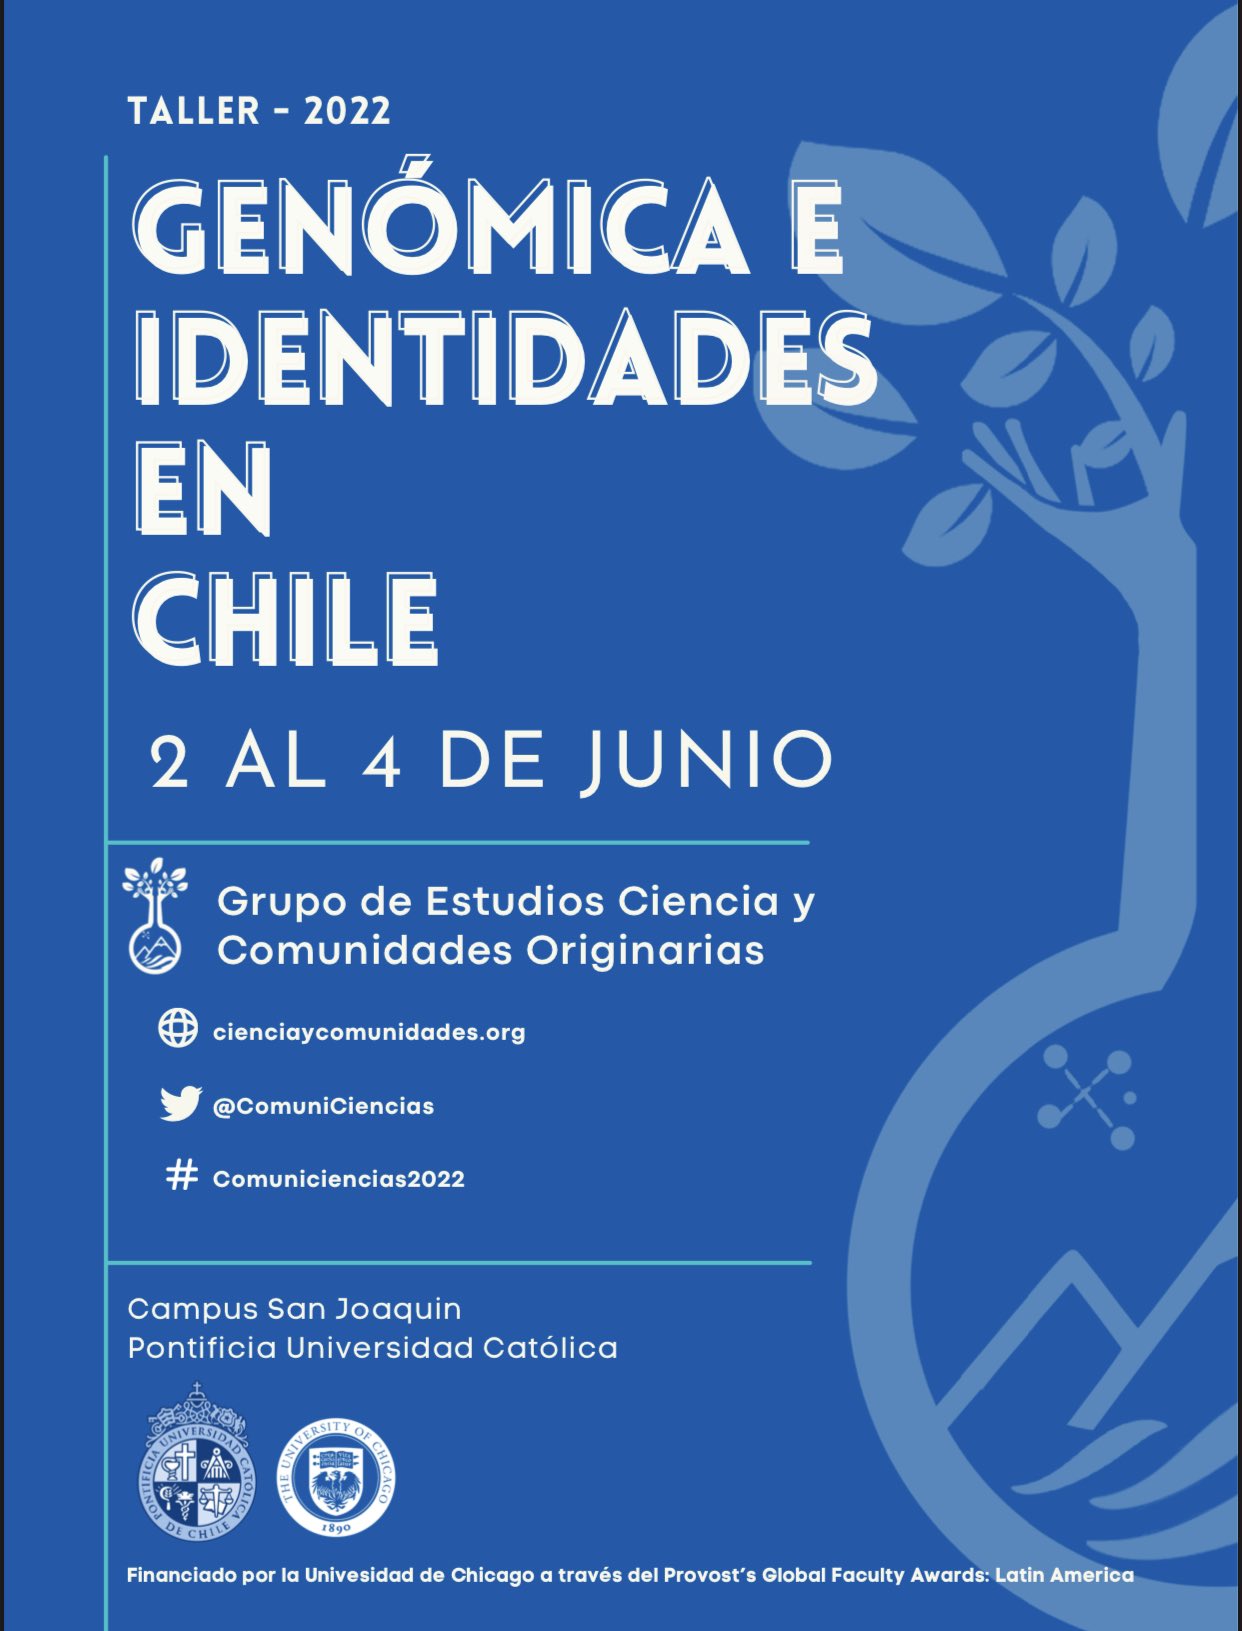 Workshop: Genomcis and identities in Chile